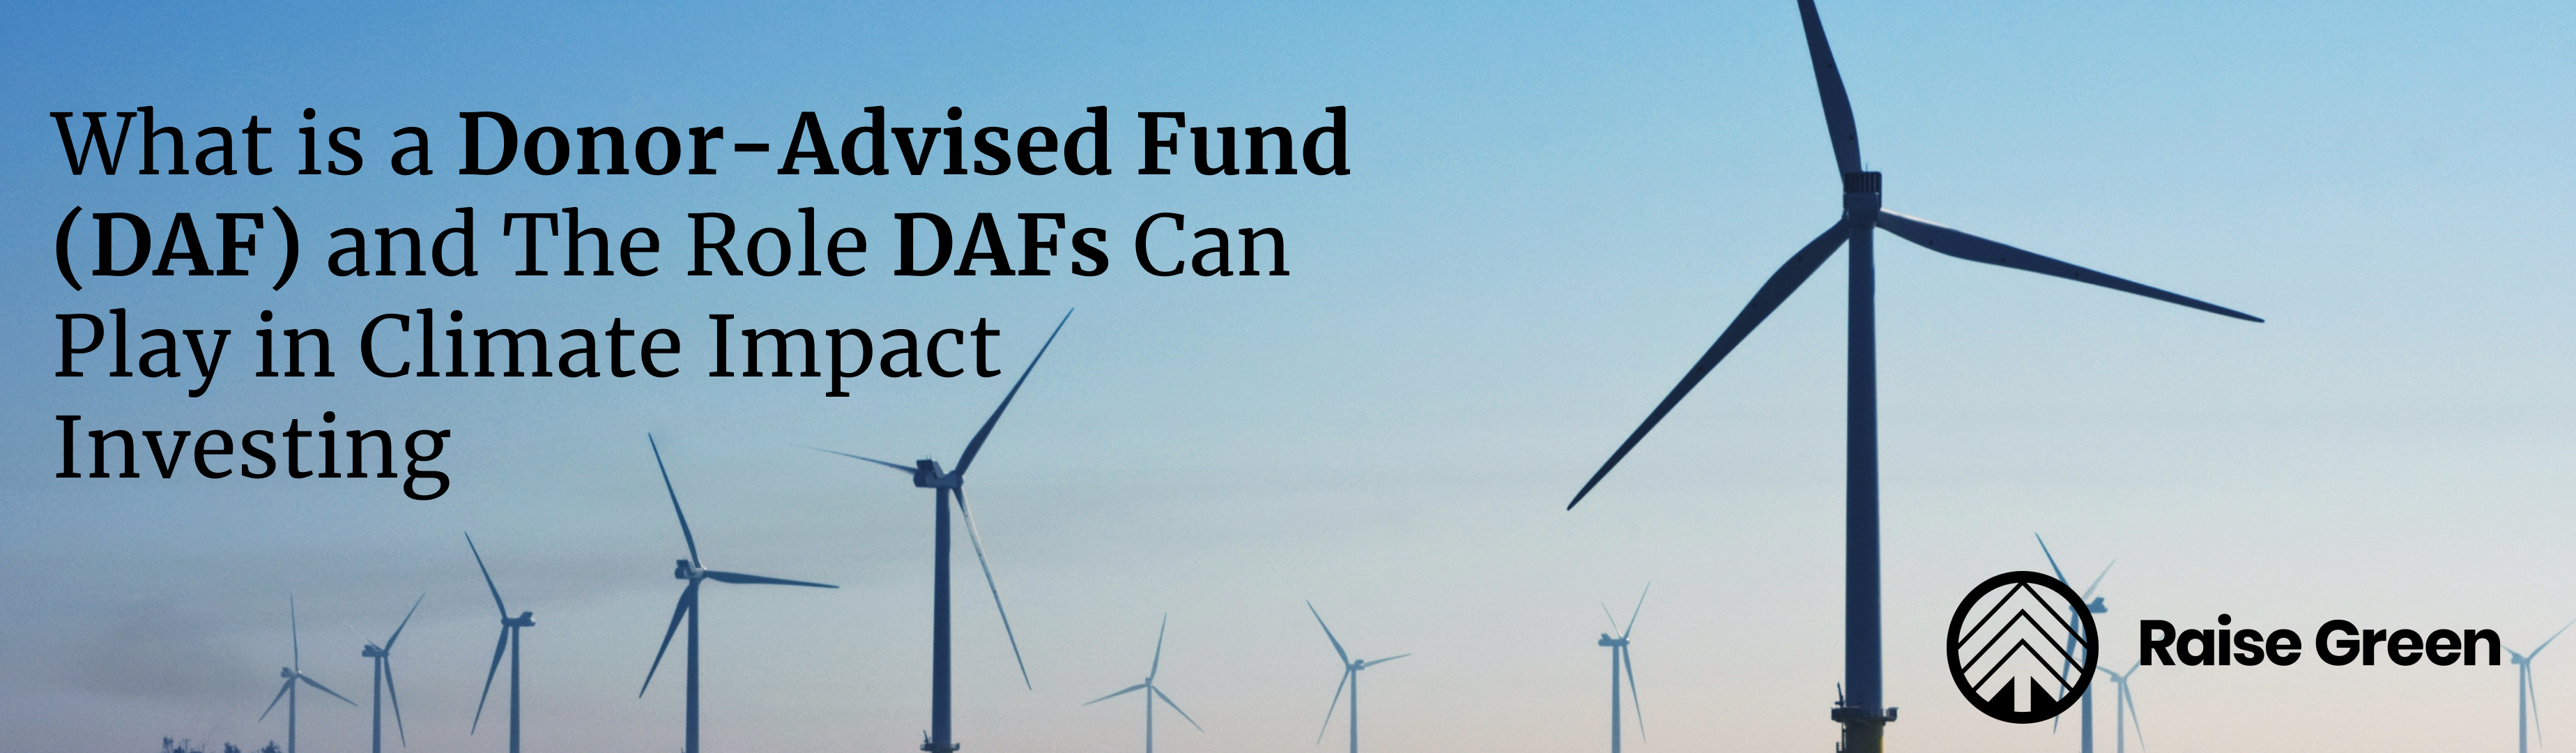 What is a Donor-Advised Fund (DAF) and The Role DAFs Can Play in Climate Impact Investing